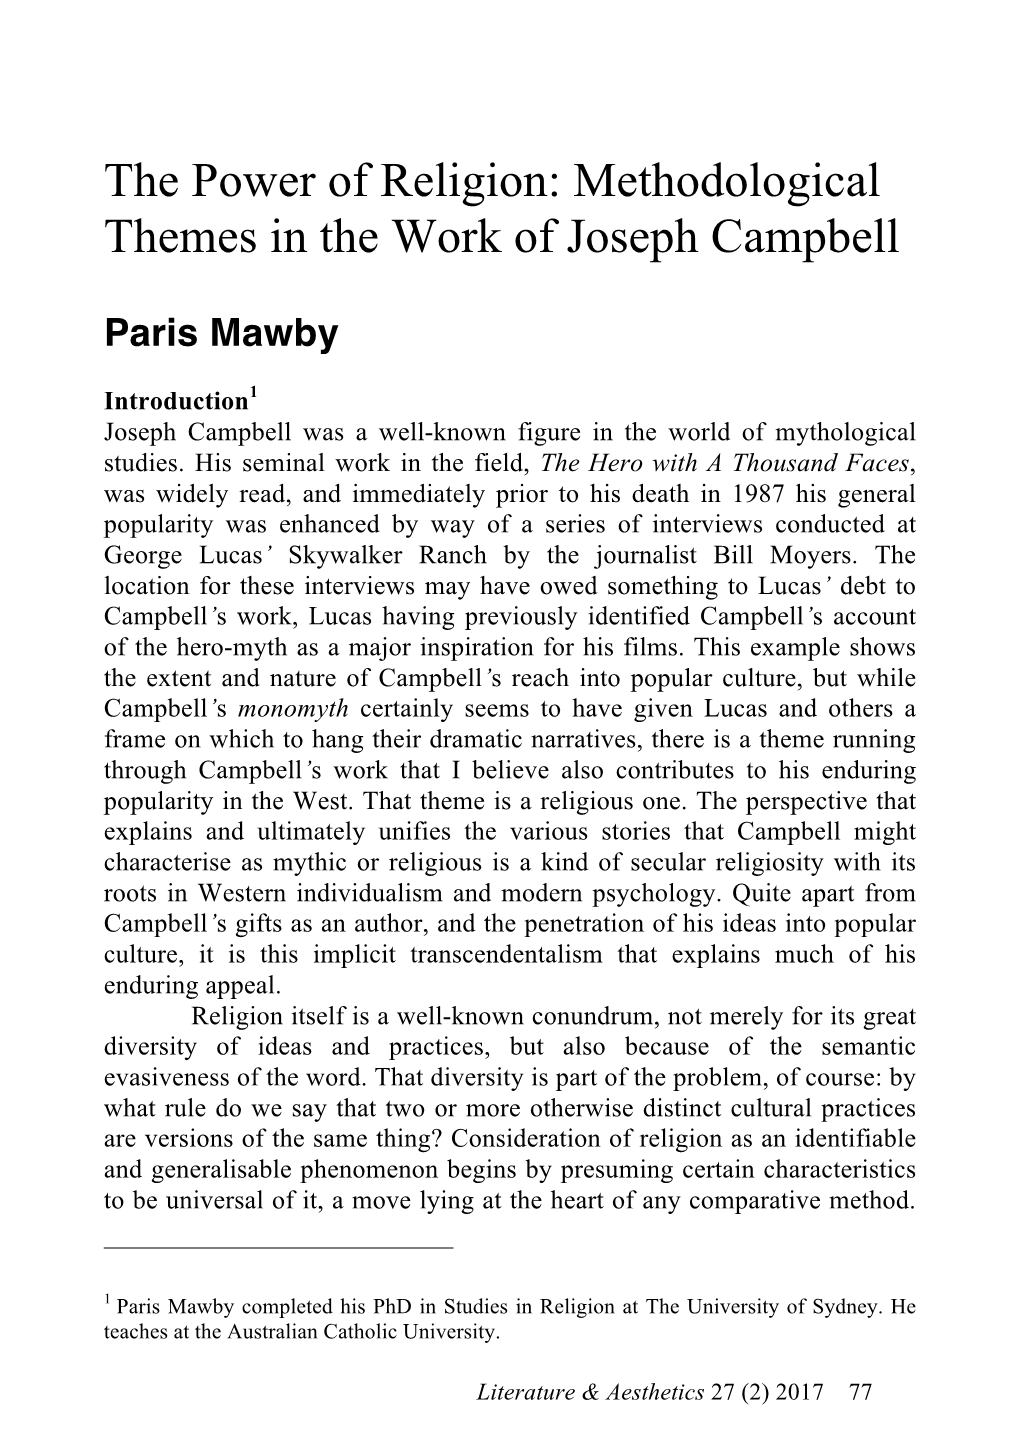 The Power of Religion: Methodological Themes in the Work of Joseph Campbell